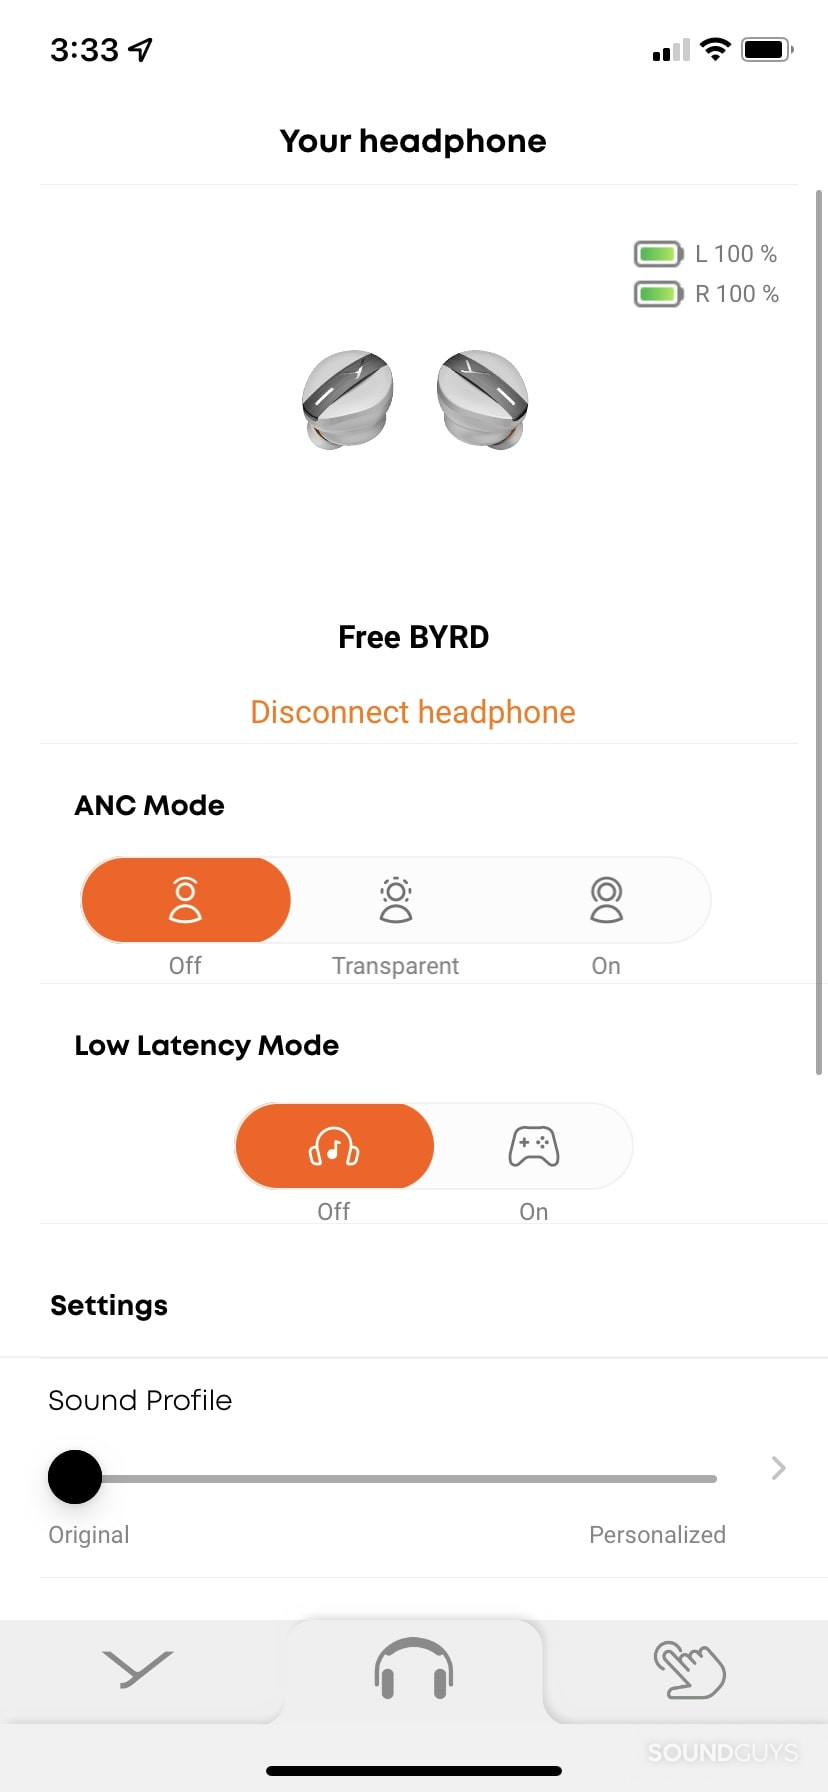 Beyerdynamic Free BYRD MIY app home screen showing listening modes and battery information.